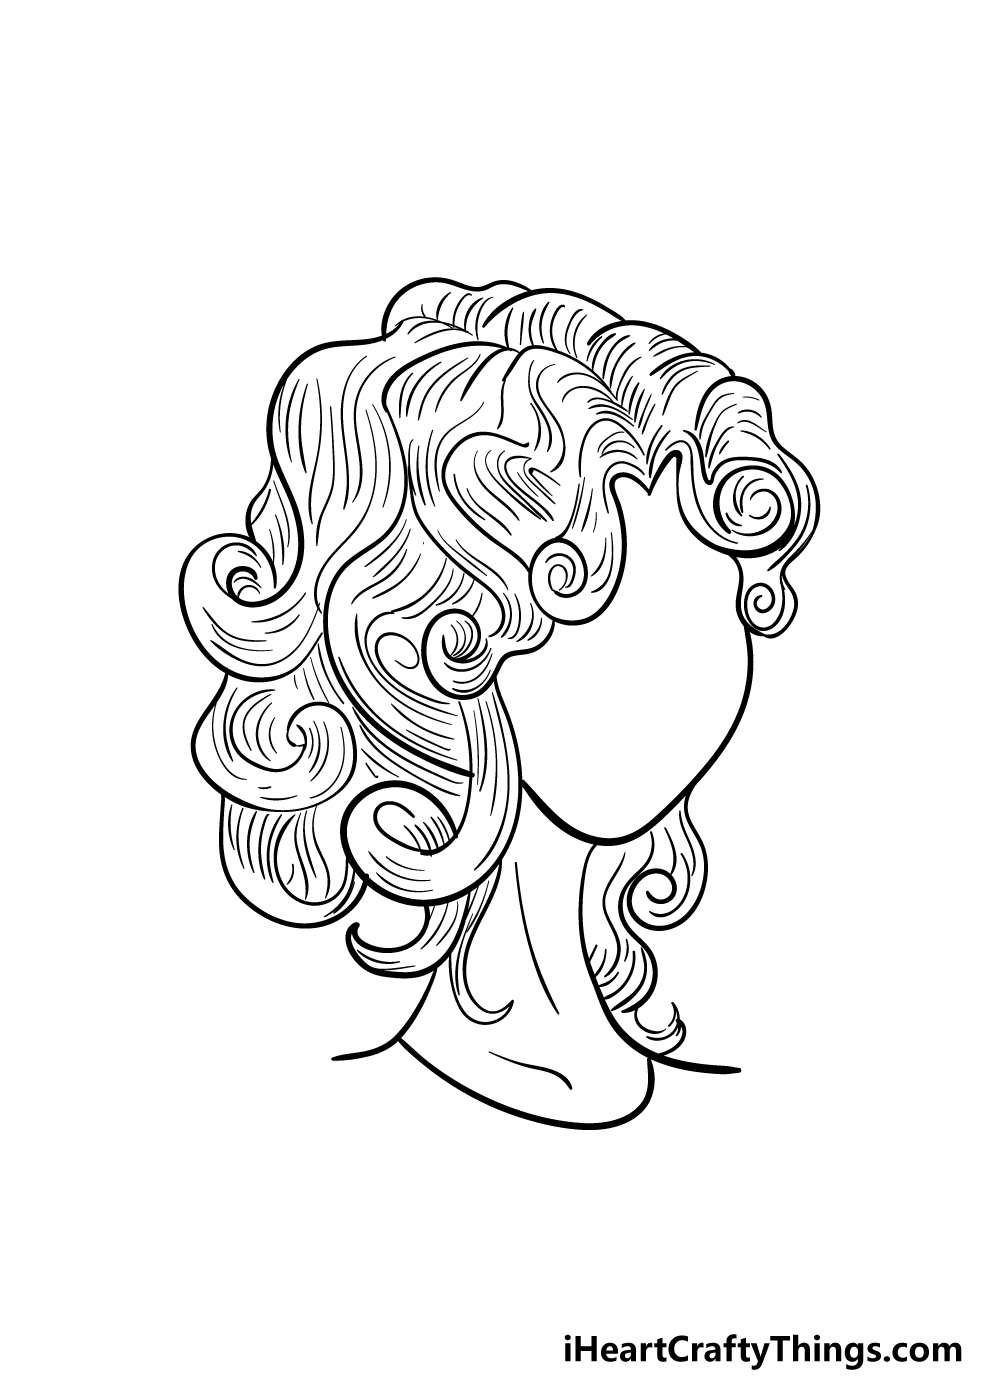 How To Draw Curly Hair, Draw Curls, Step by Step, Drawing Guide, by Ghostiy  - DragoArt